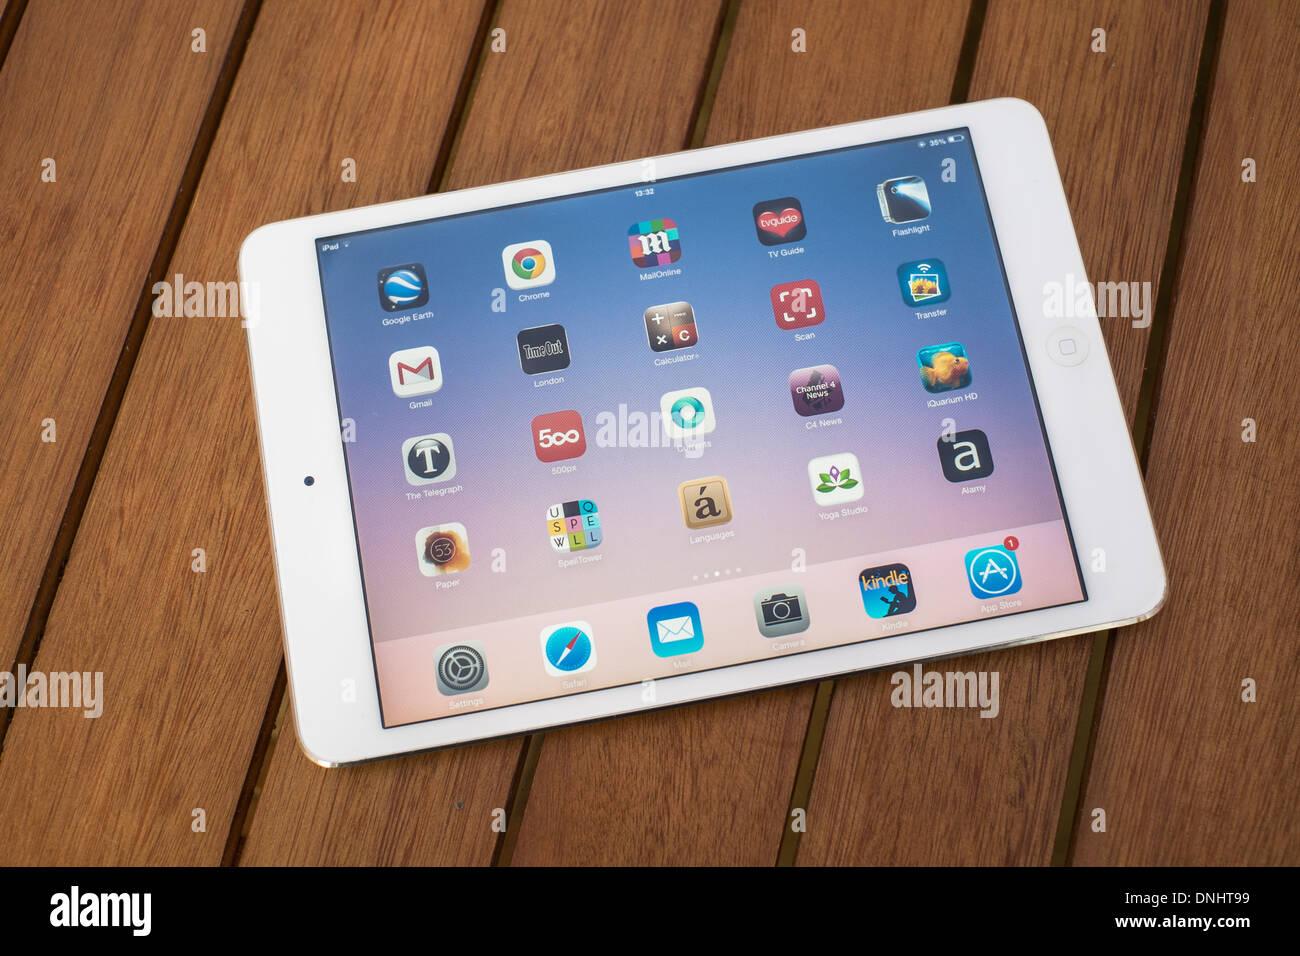 White Ipad Mini on a Wooden Table Showing the Apps Screen. Stock Photo